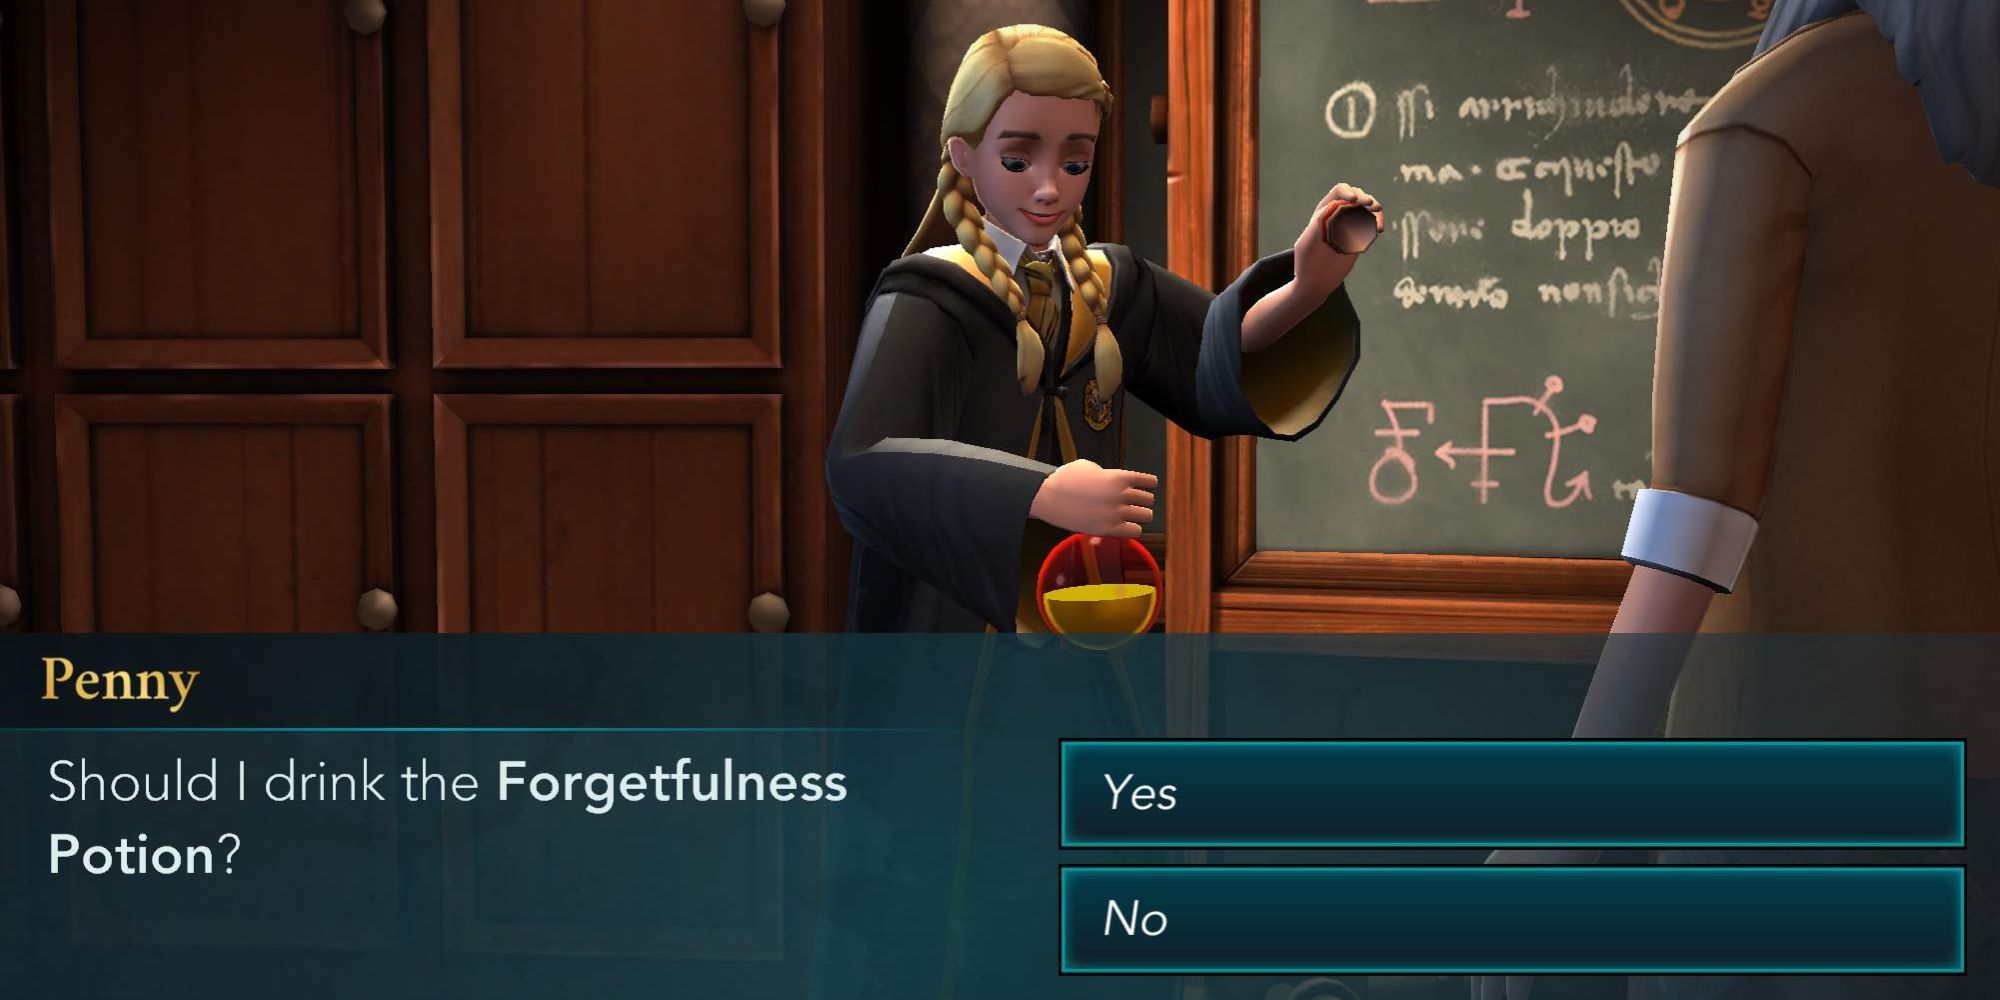 A student considers drinking a Forgetfulness Potion